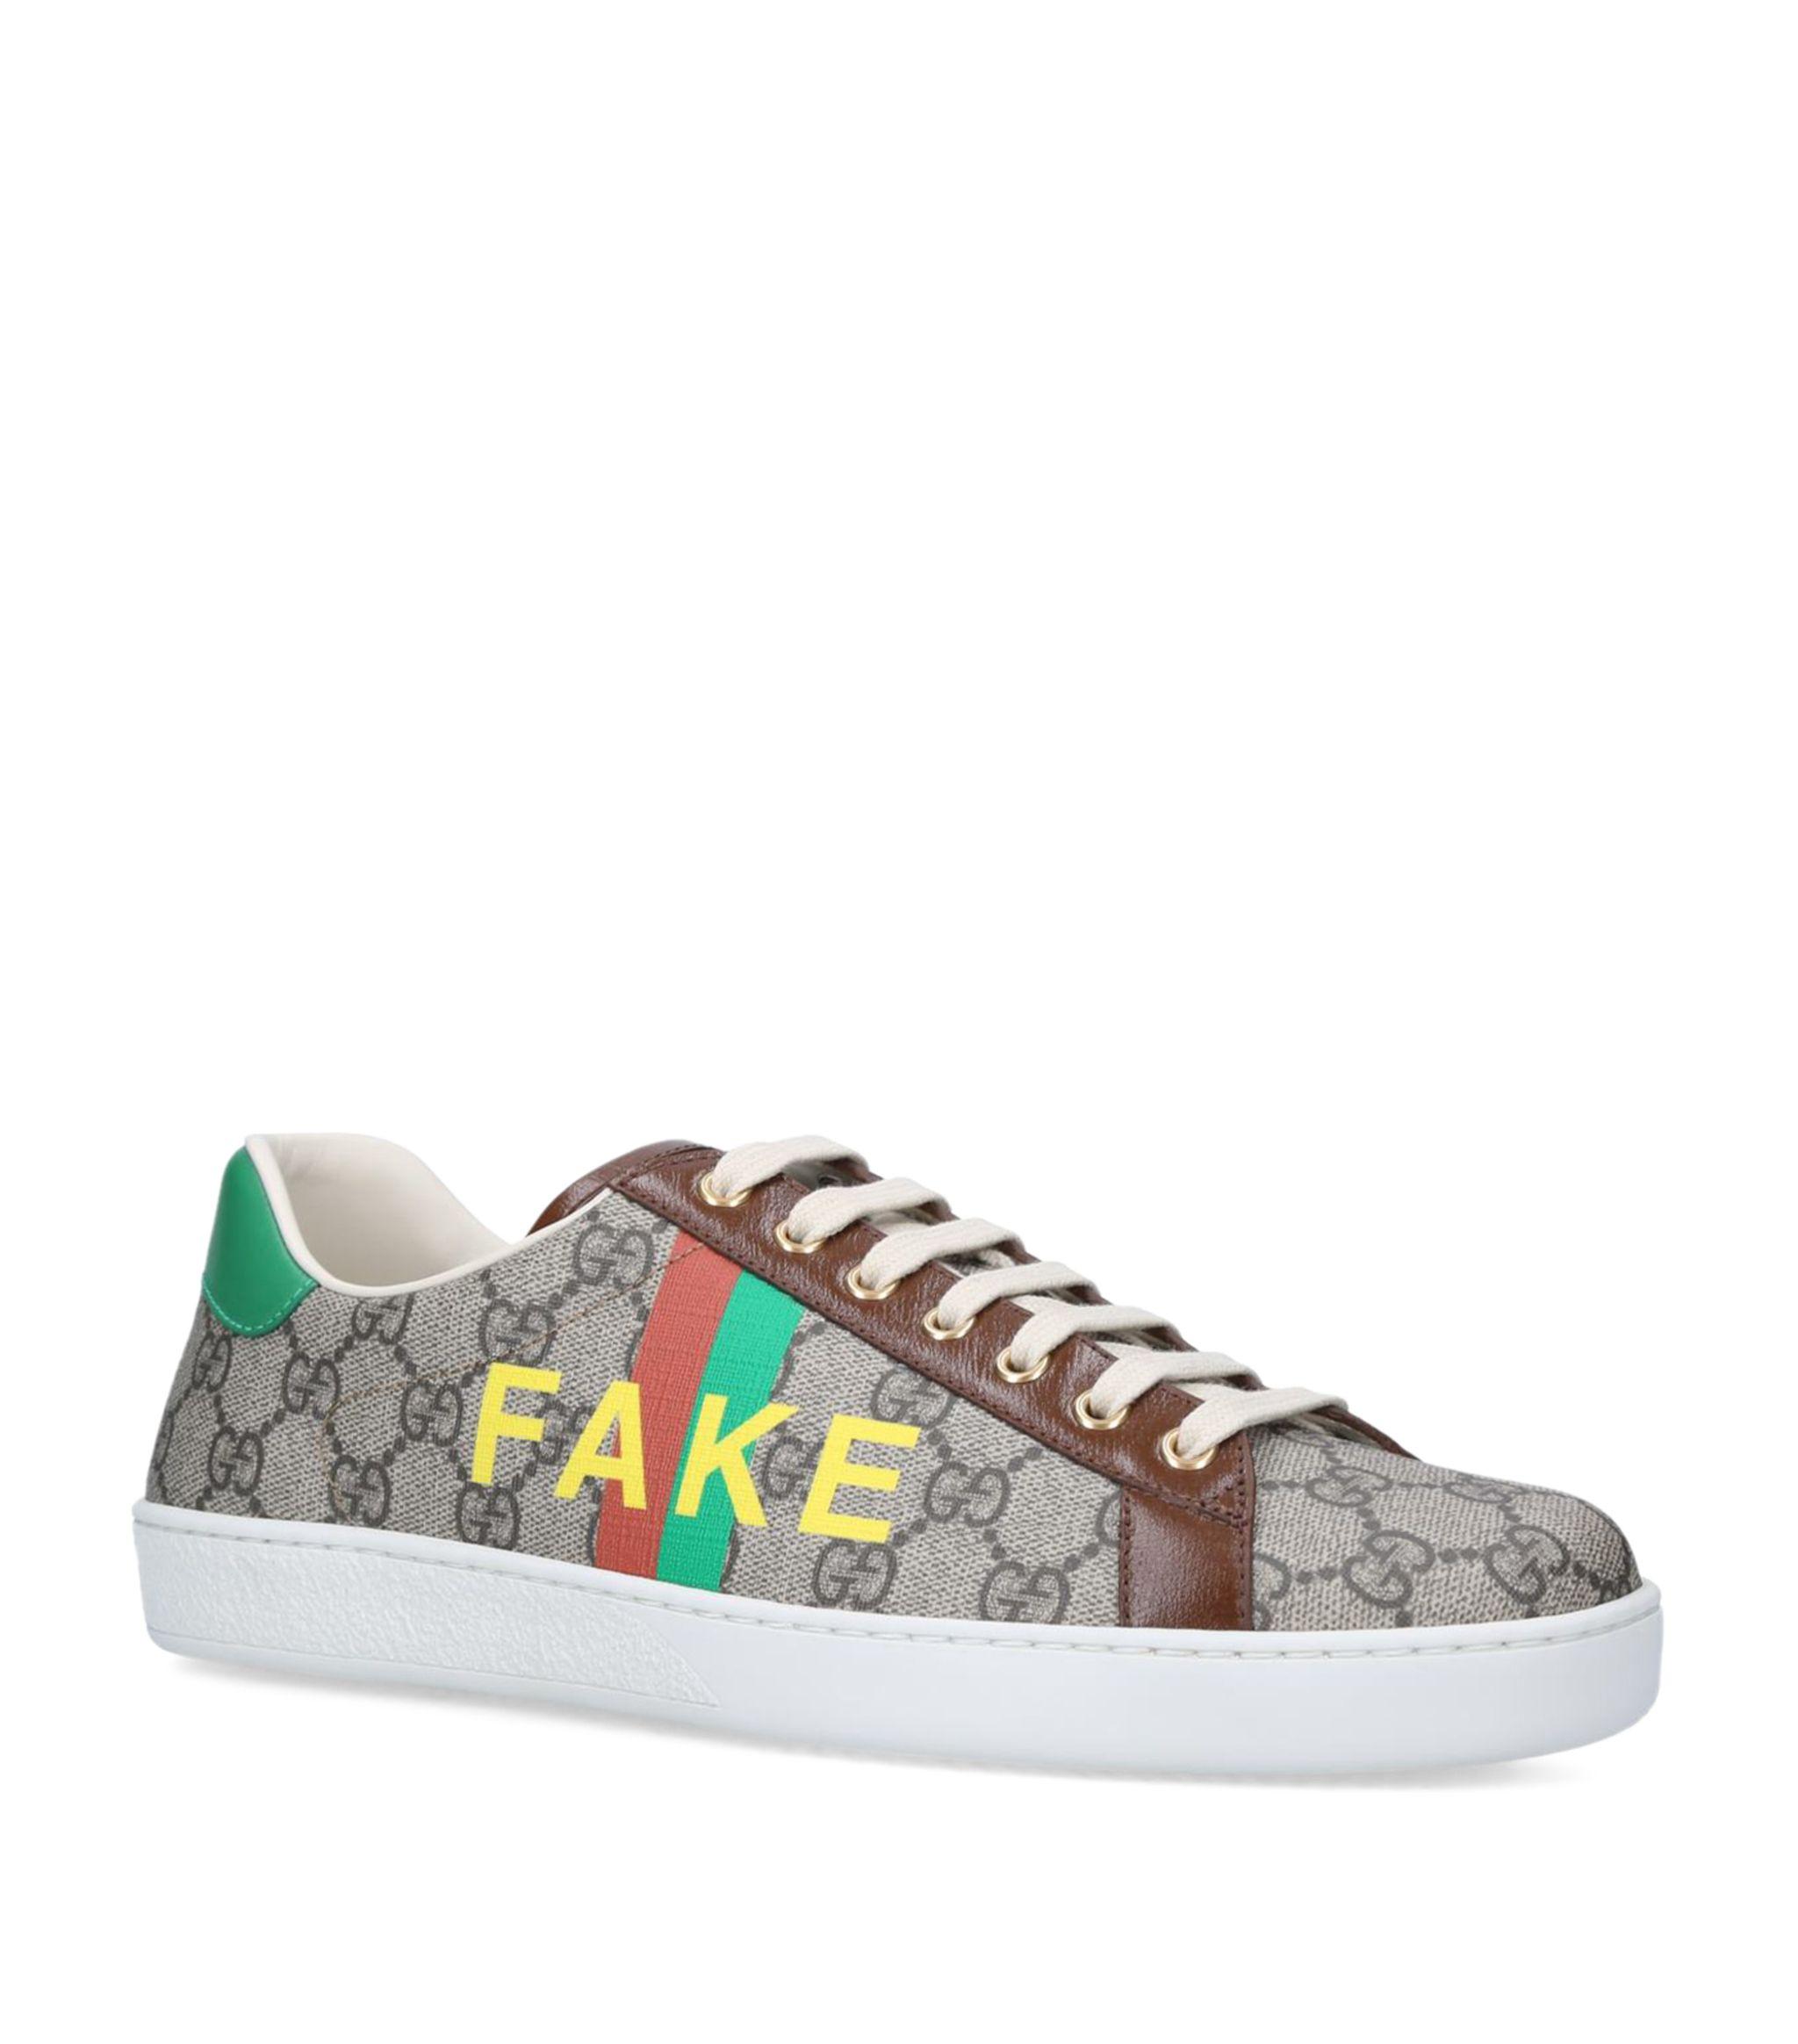 ace sneaker with gg print replica